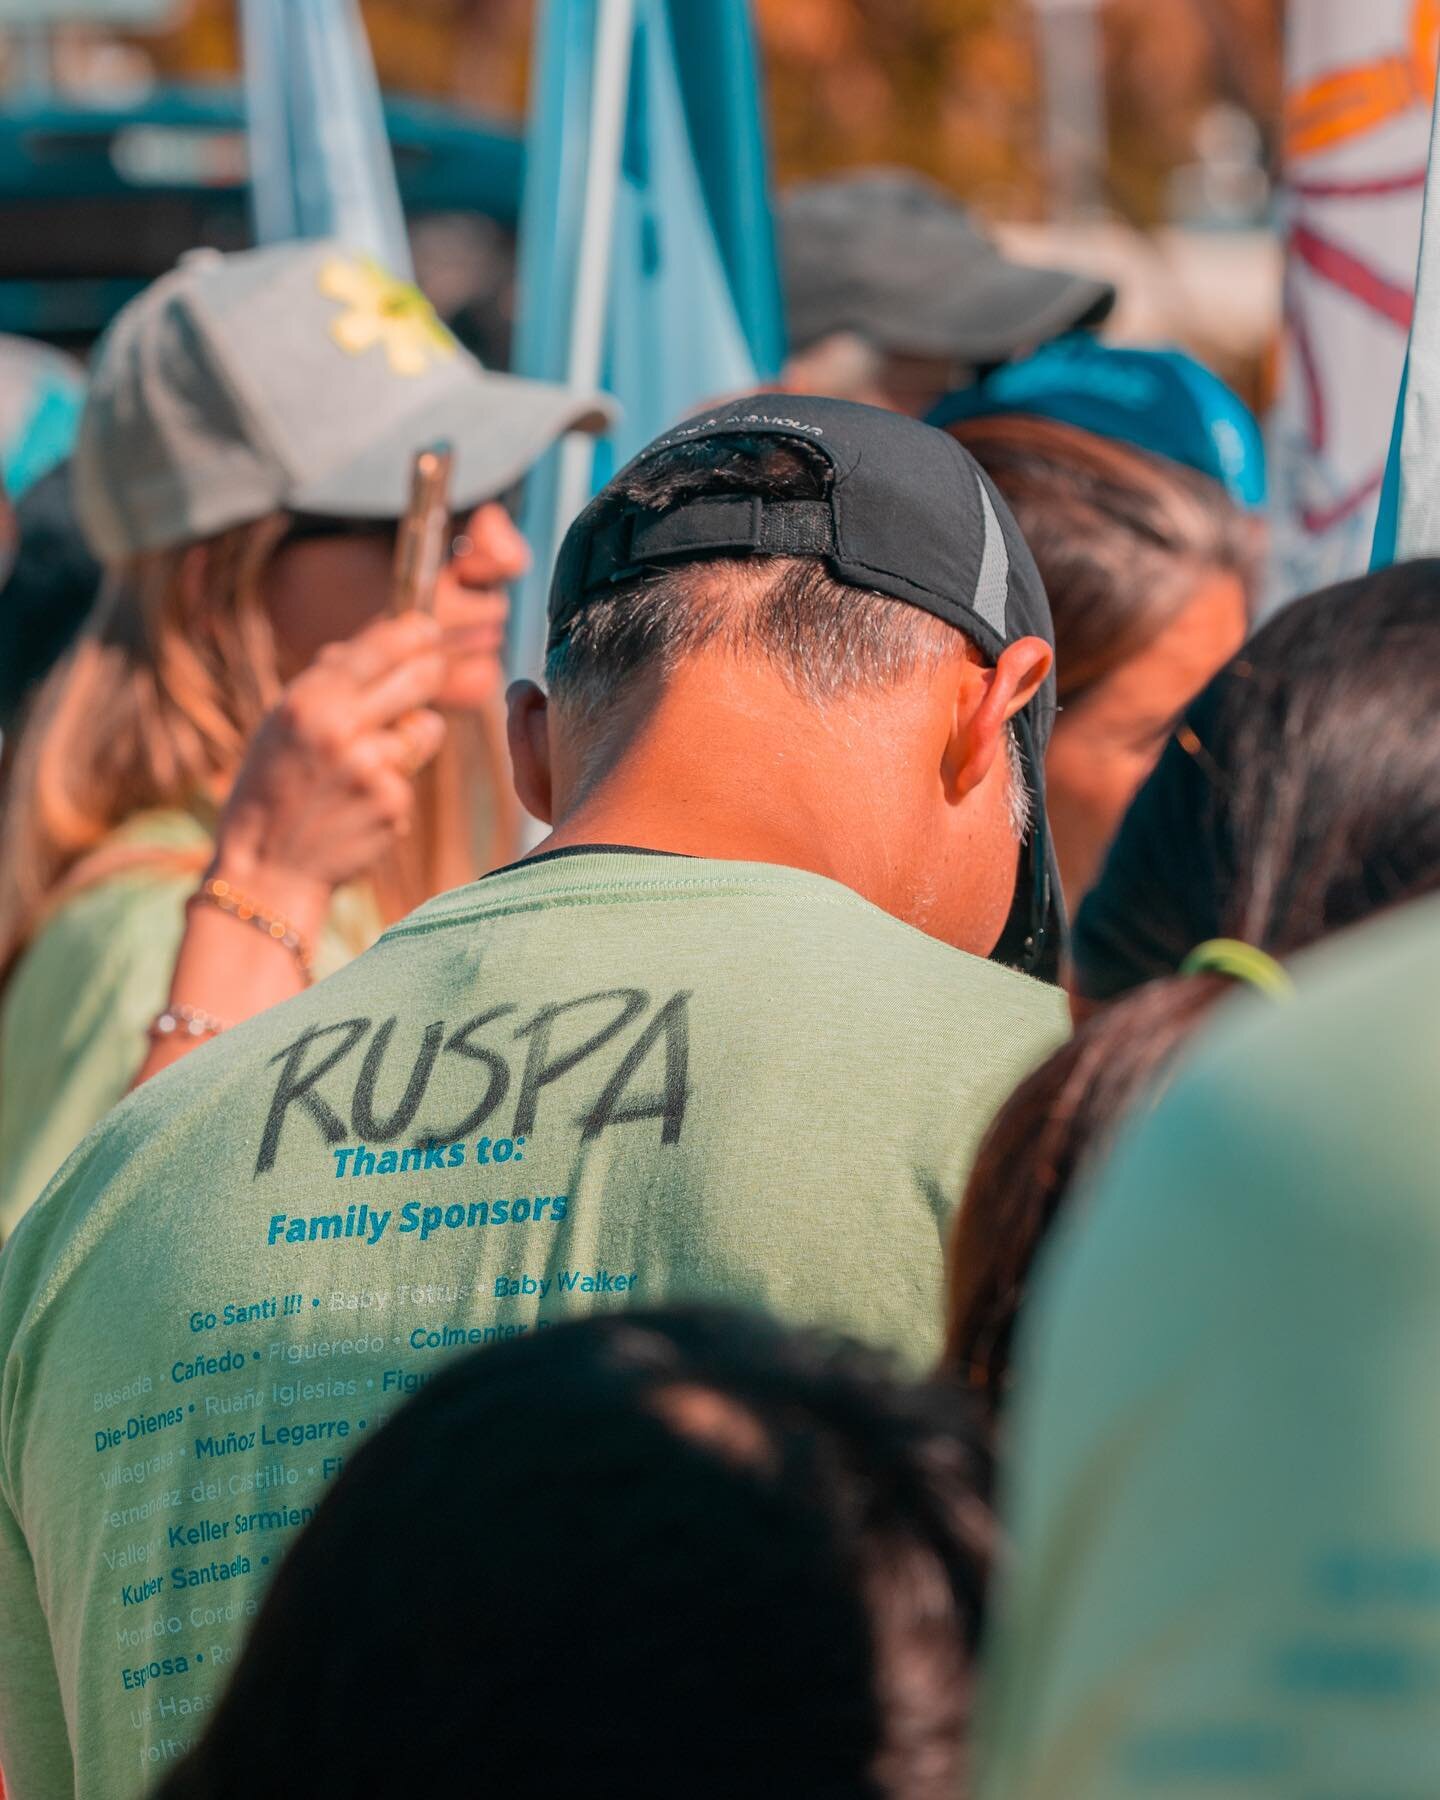 We will always miss you our brother, Ruspa. 😞